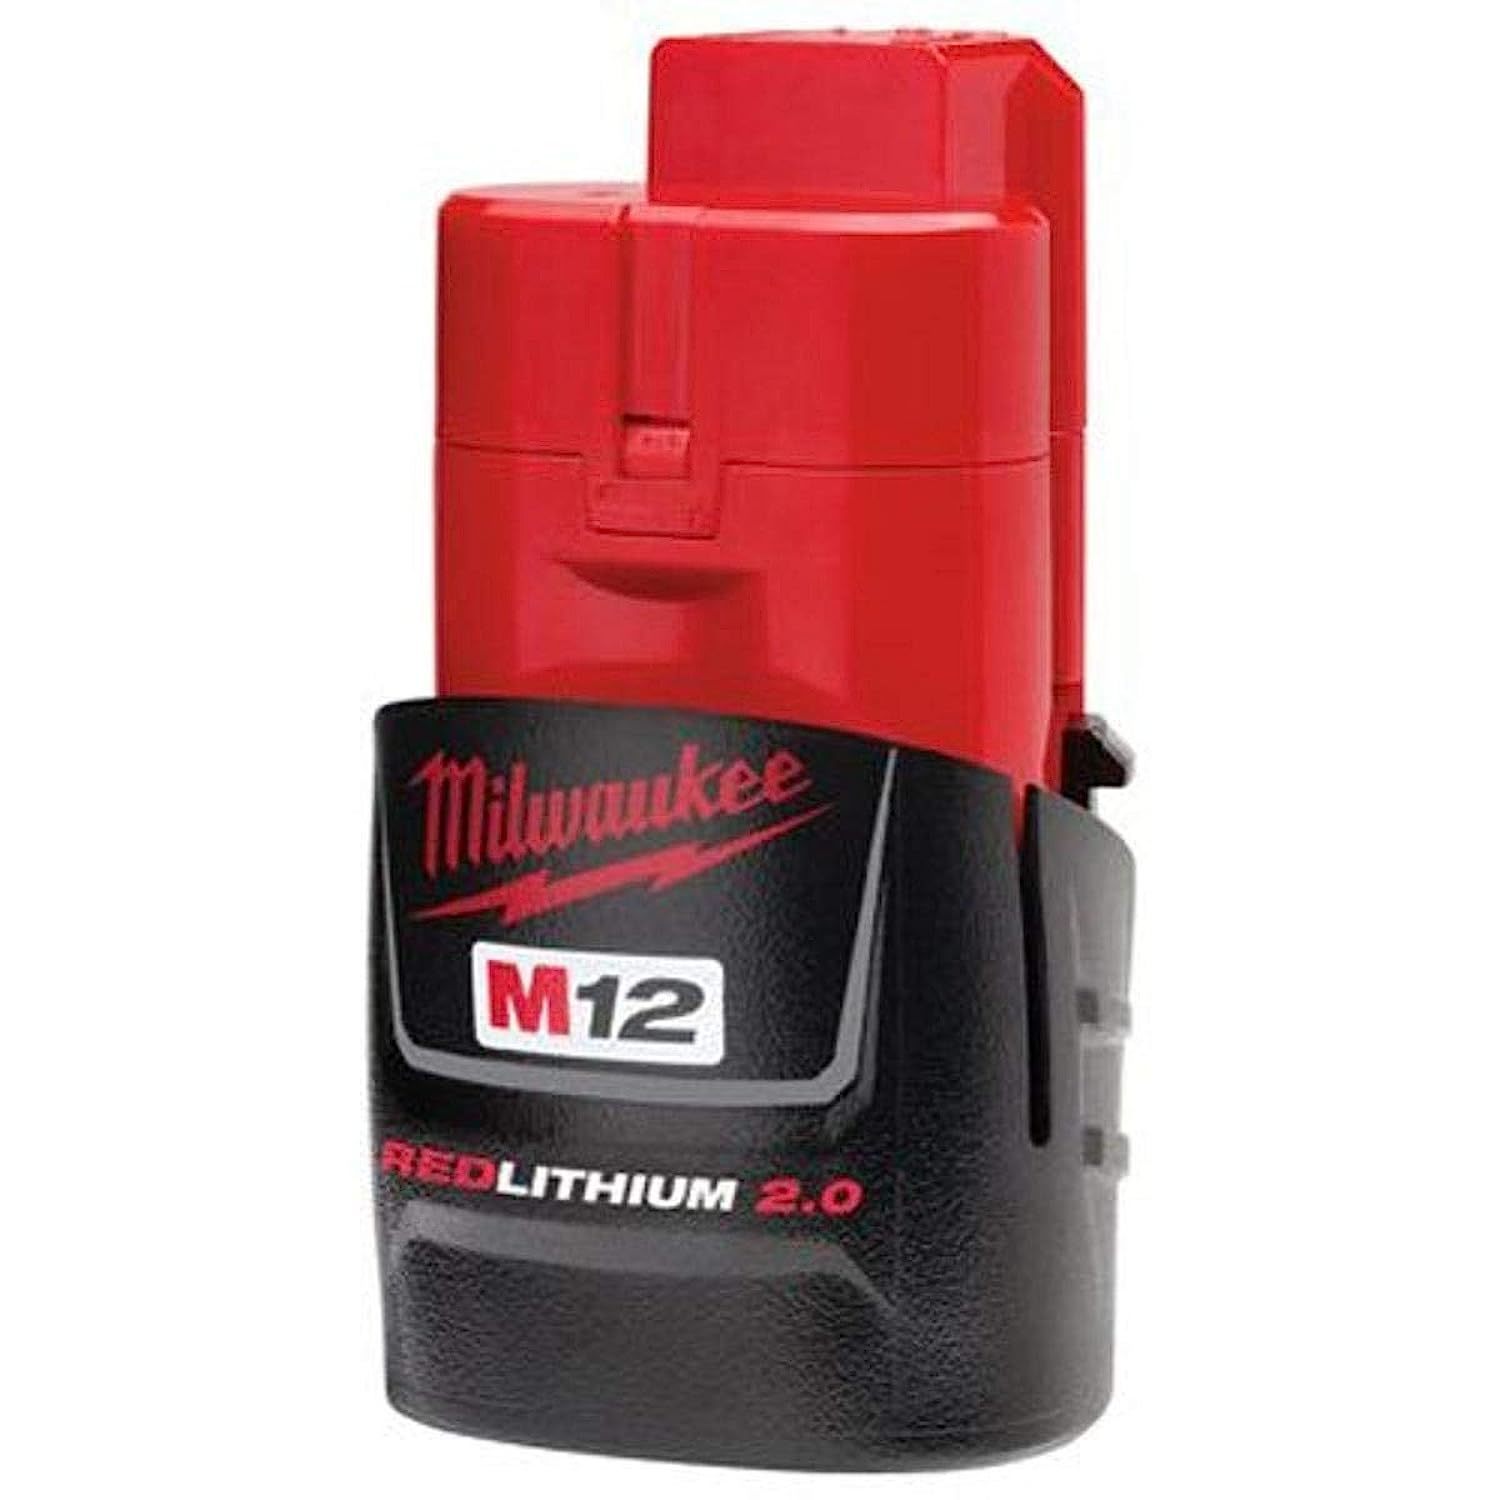 Milwaukee 48-11-2420 M12 REDLITHIUM 2.0 Compact Battery Pack (1-Pack) - $54.99